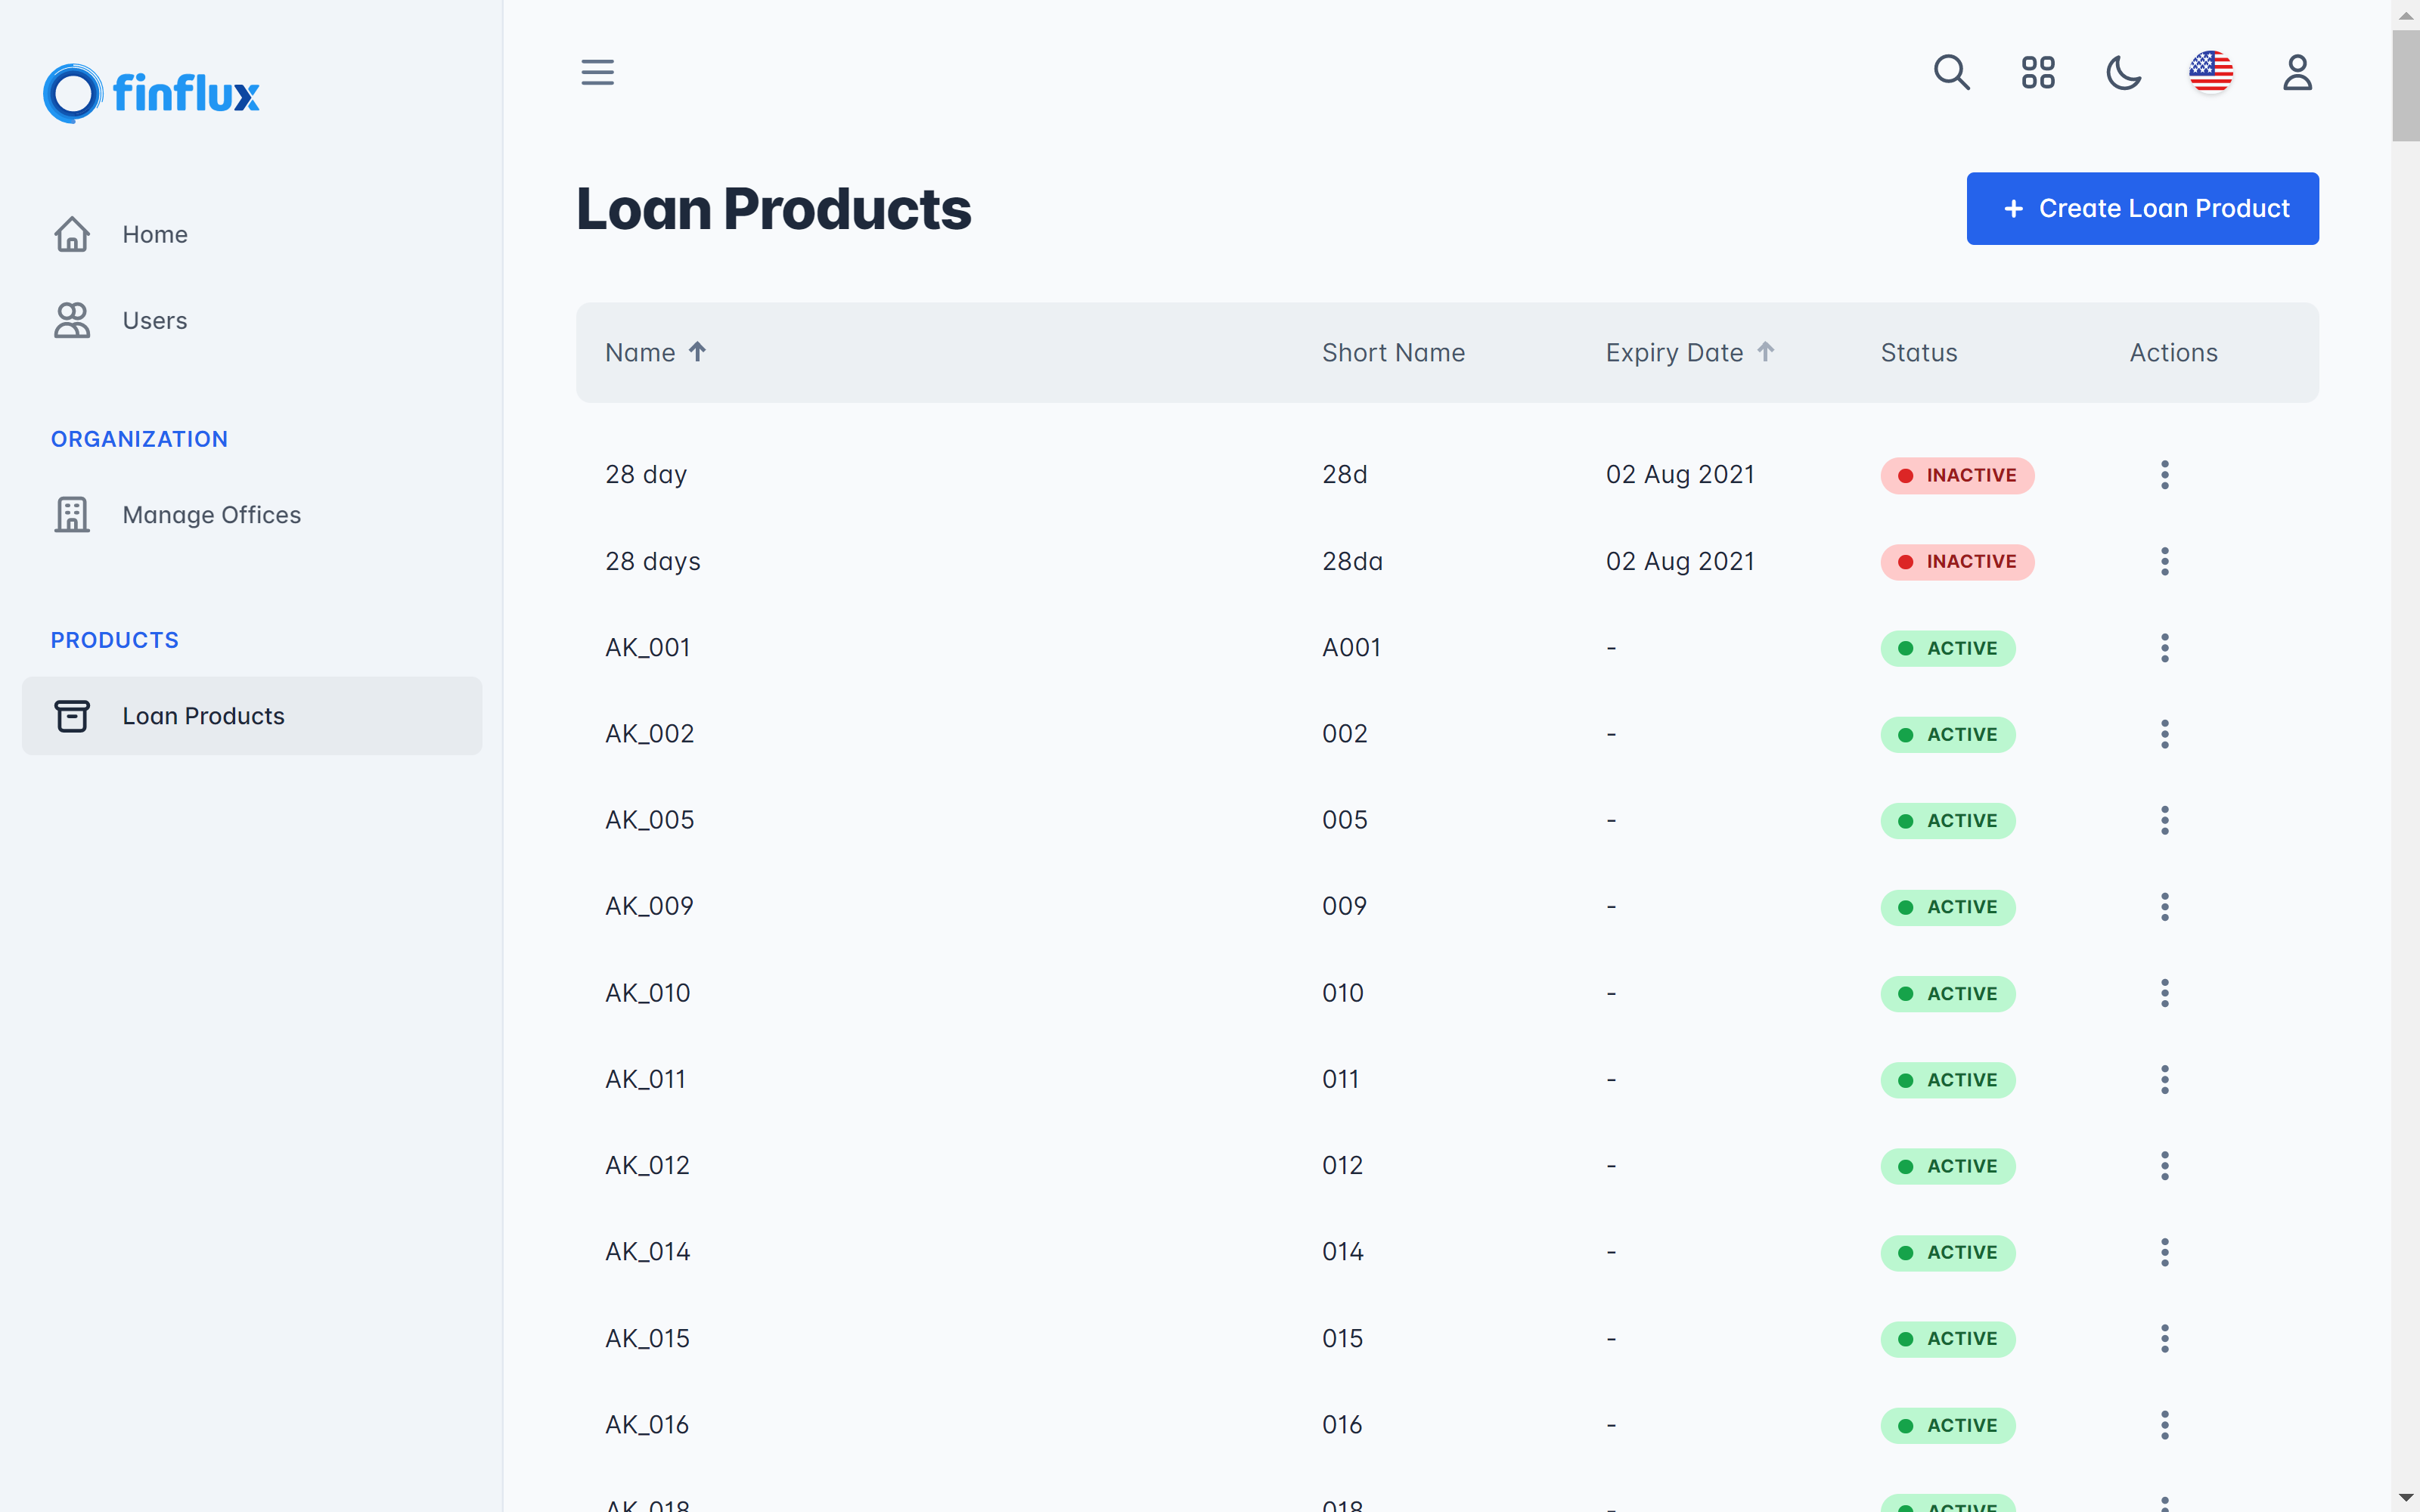 Loan Products Dashboard - Contains listicle view of all current active & inactive loan products in the Finflux Suite.